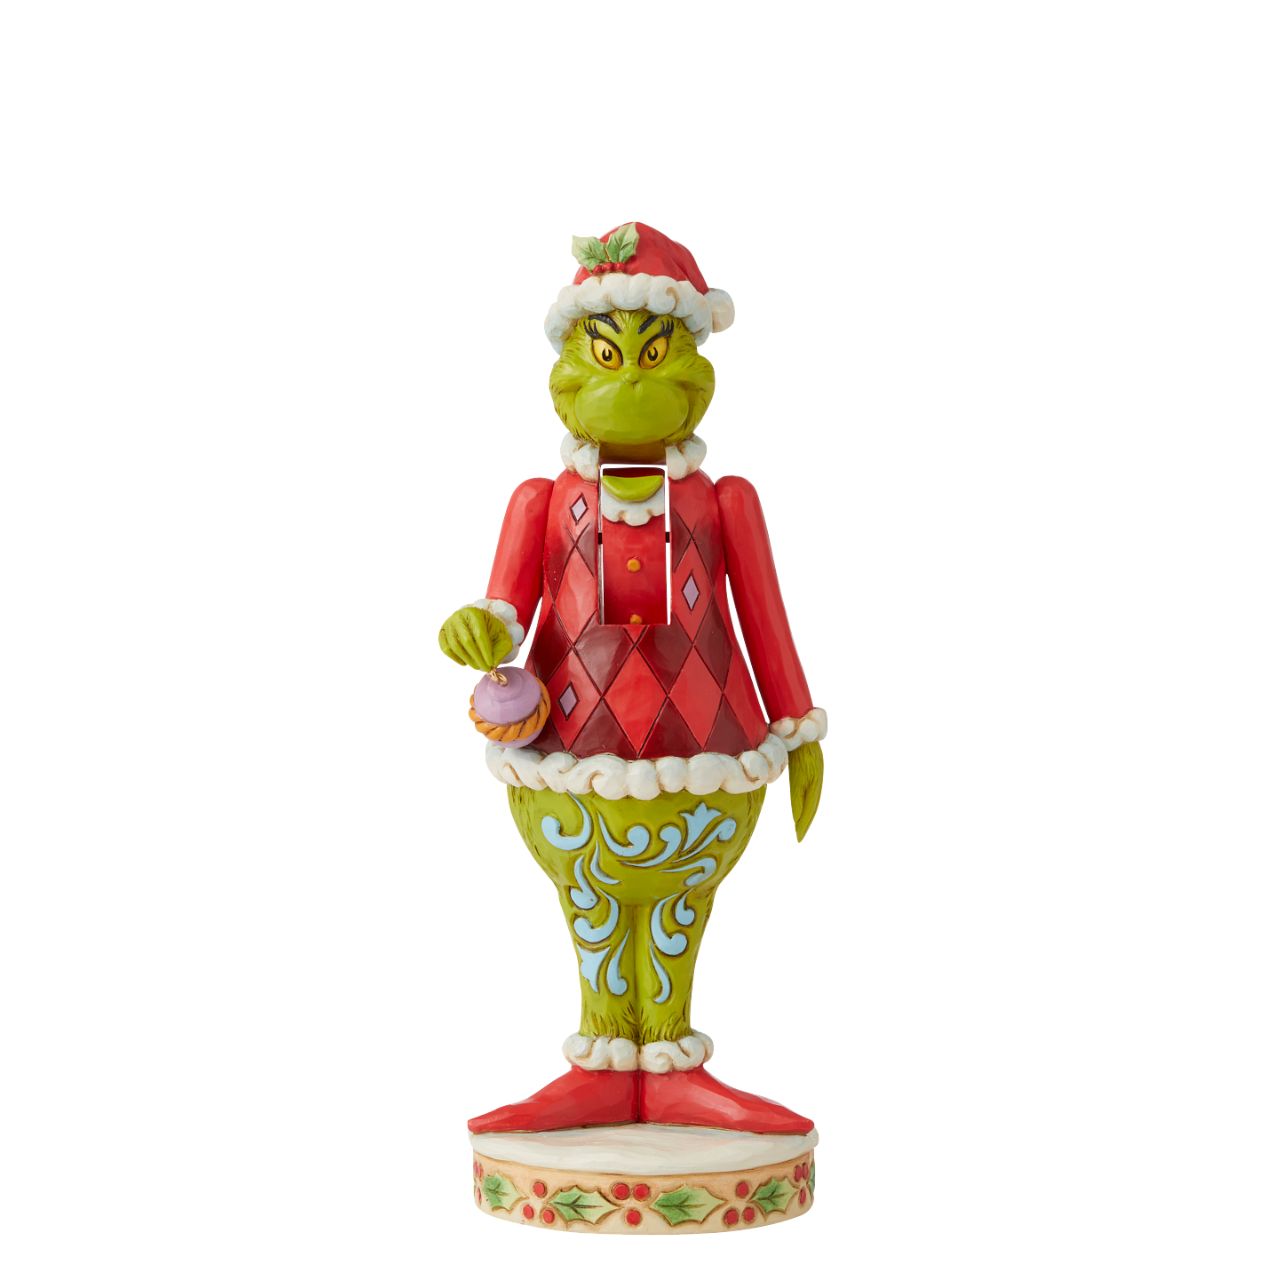 Grinch Nutcracker Figurine - The Grinch by Jim Shore  Marrying two beloved holiday figures, Jim Shore creates a Grinch Nutcracker that captures the grump in all his glory. With holly brimmed in his Santa hat, no one dares kiss this Christmas curmudgeon for fear of being cracked across the face.